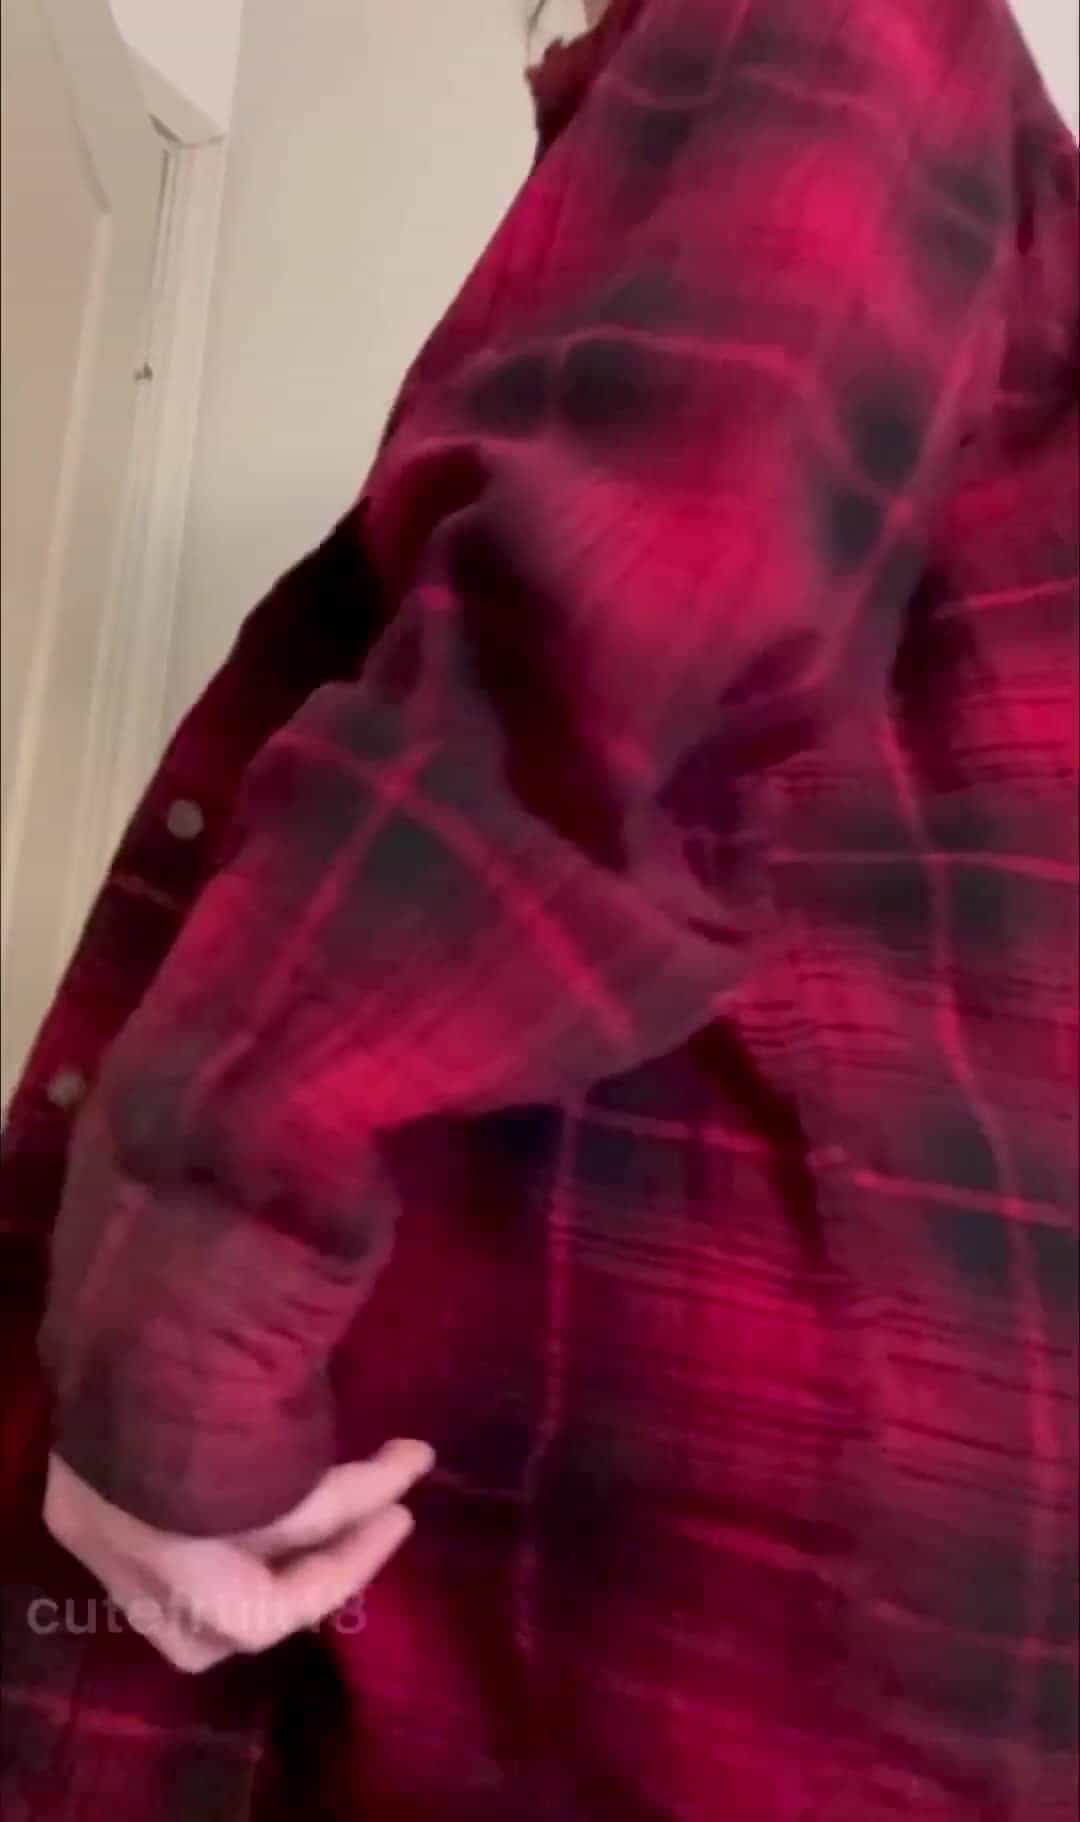 hiding some ass under this flannel, you hungry? 😋